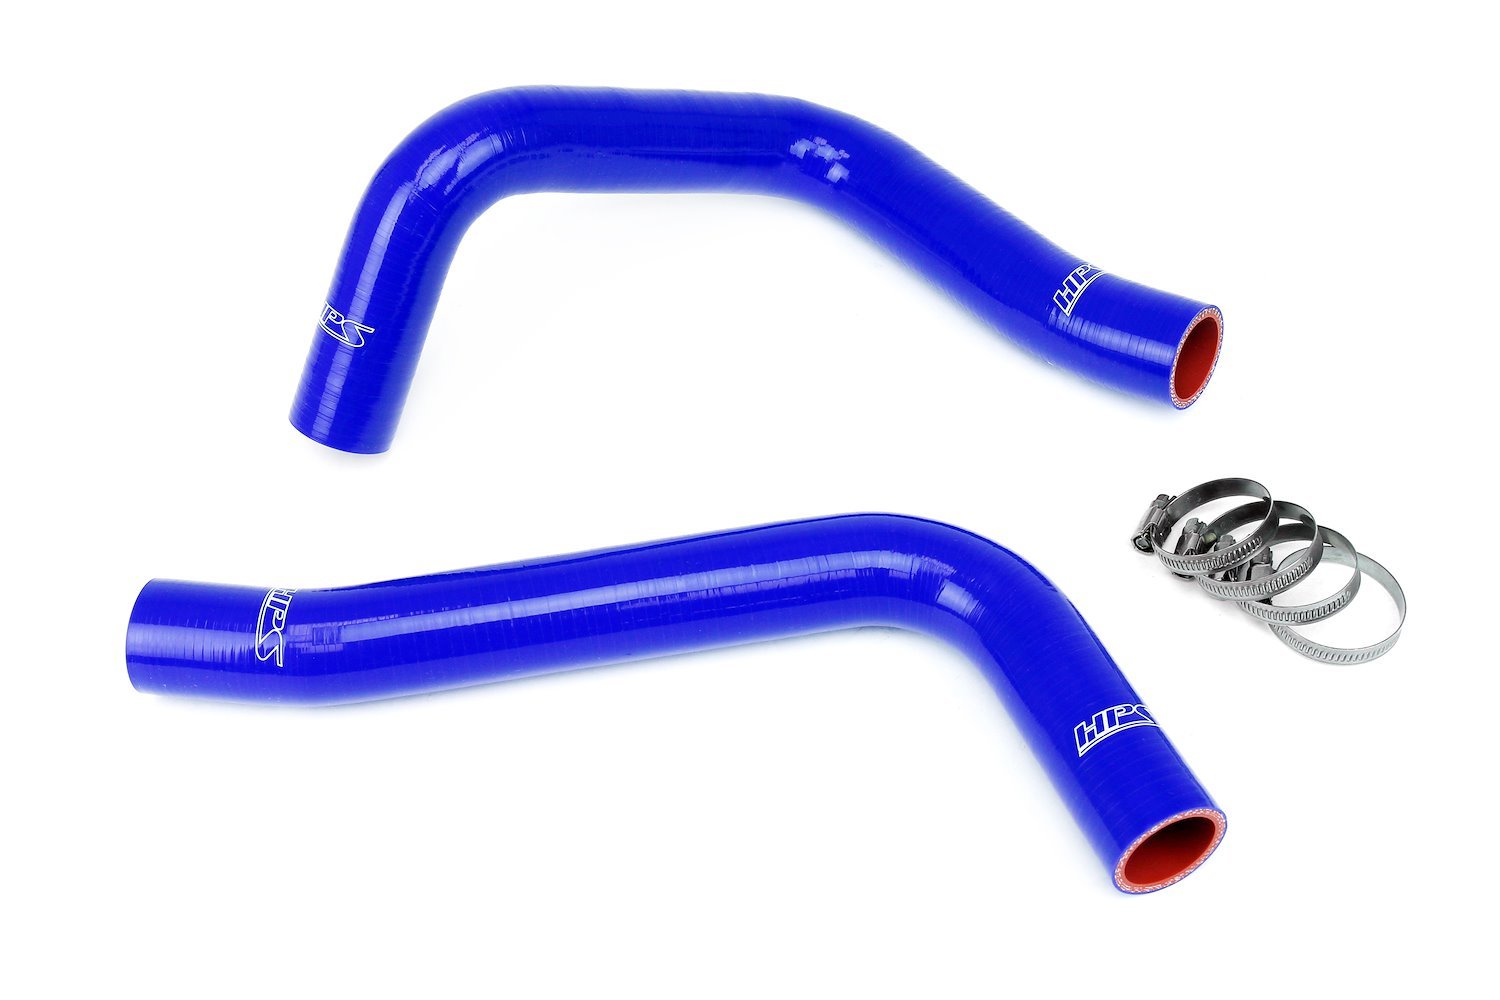 57-2056-BLUE Radiator Hose Kit, 3-Ply Reinforced Silicone, Replaces Rubber Radiator Coolant Hoses